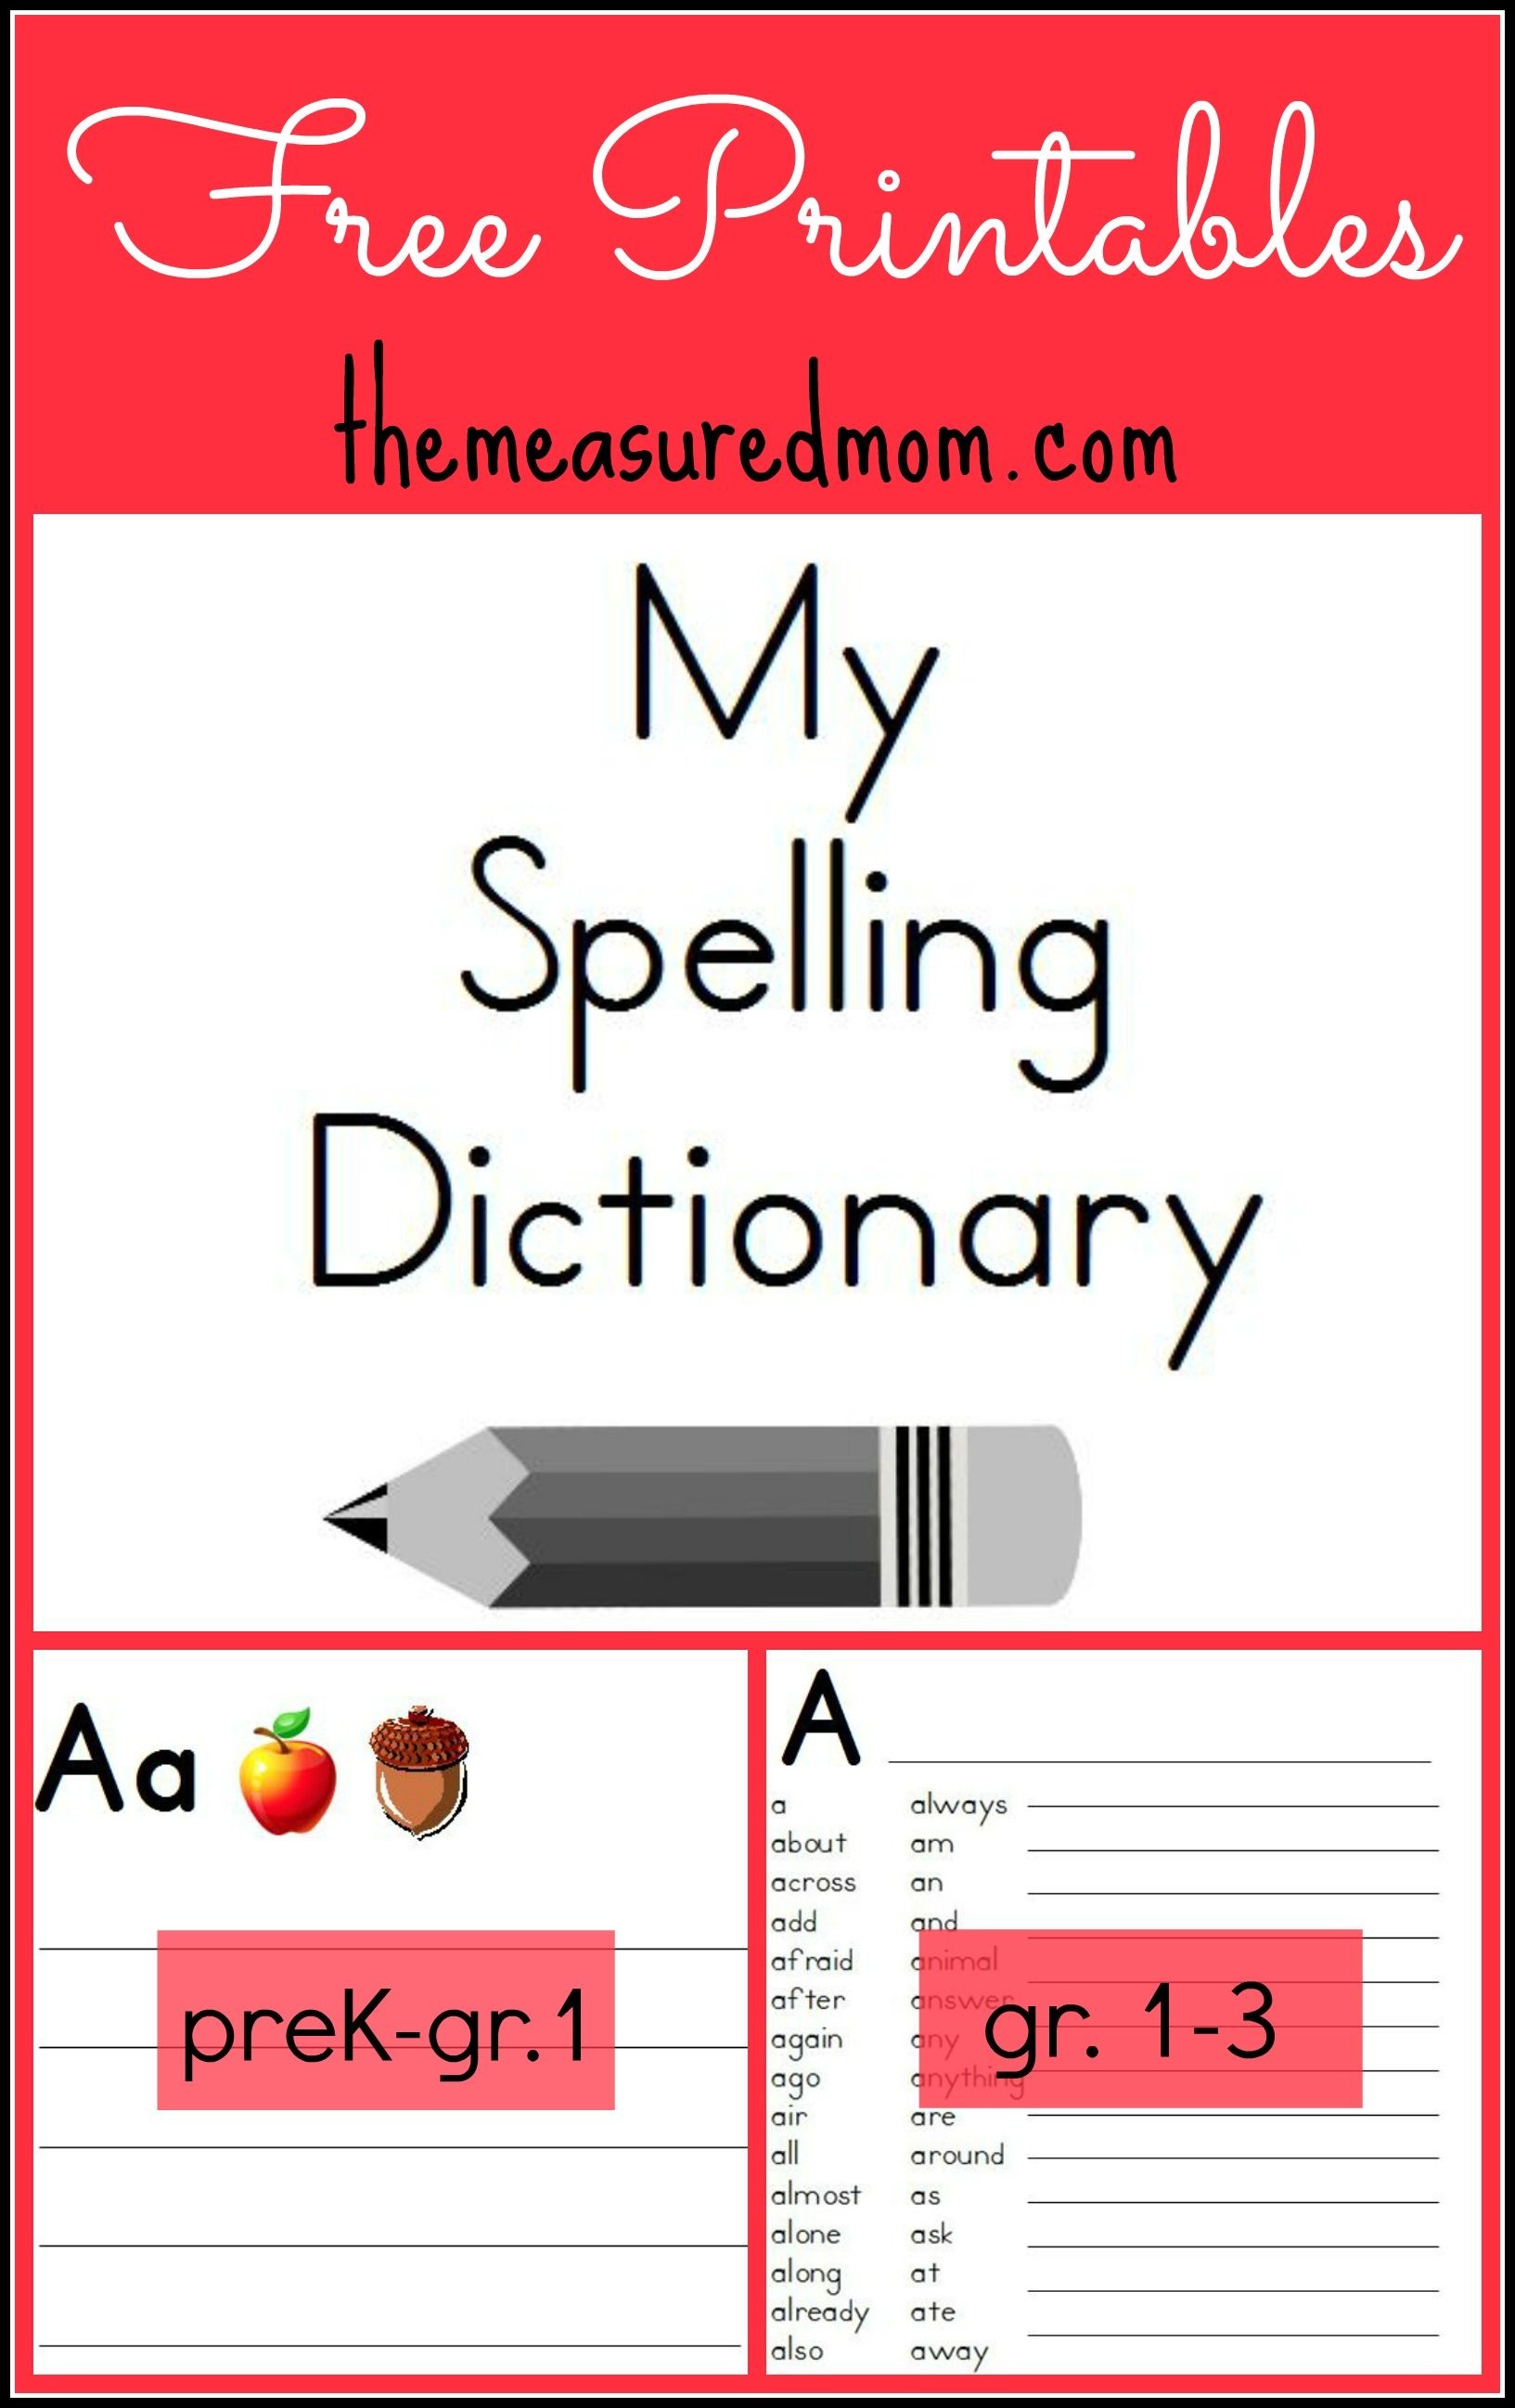 Printable Spelling Dictionary For Kids | Free Printables - Free Printable Picture Dictionary For Kids